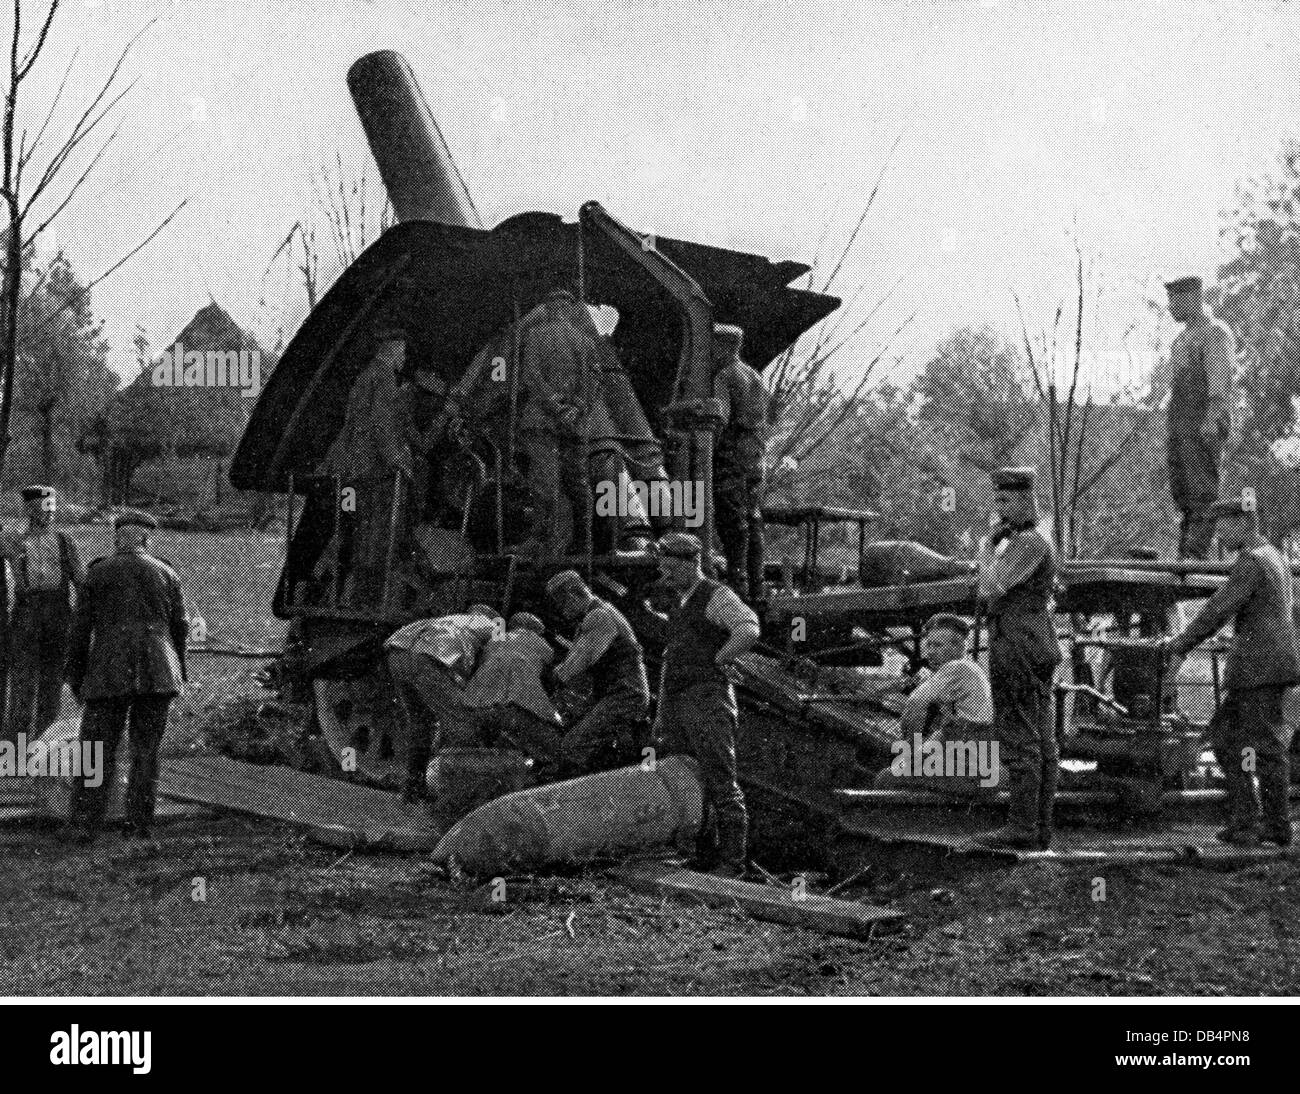 events, First World War / WWI, Western Front, German 42 cm gun 'Big Bertha' with gun crew, Additional-Rights-Clearences-Not Available Stock Photo